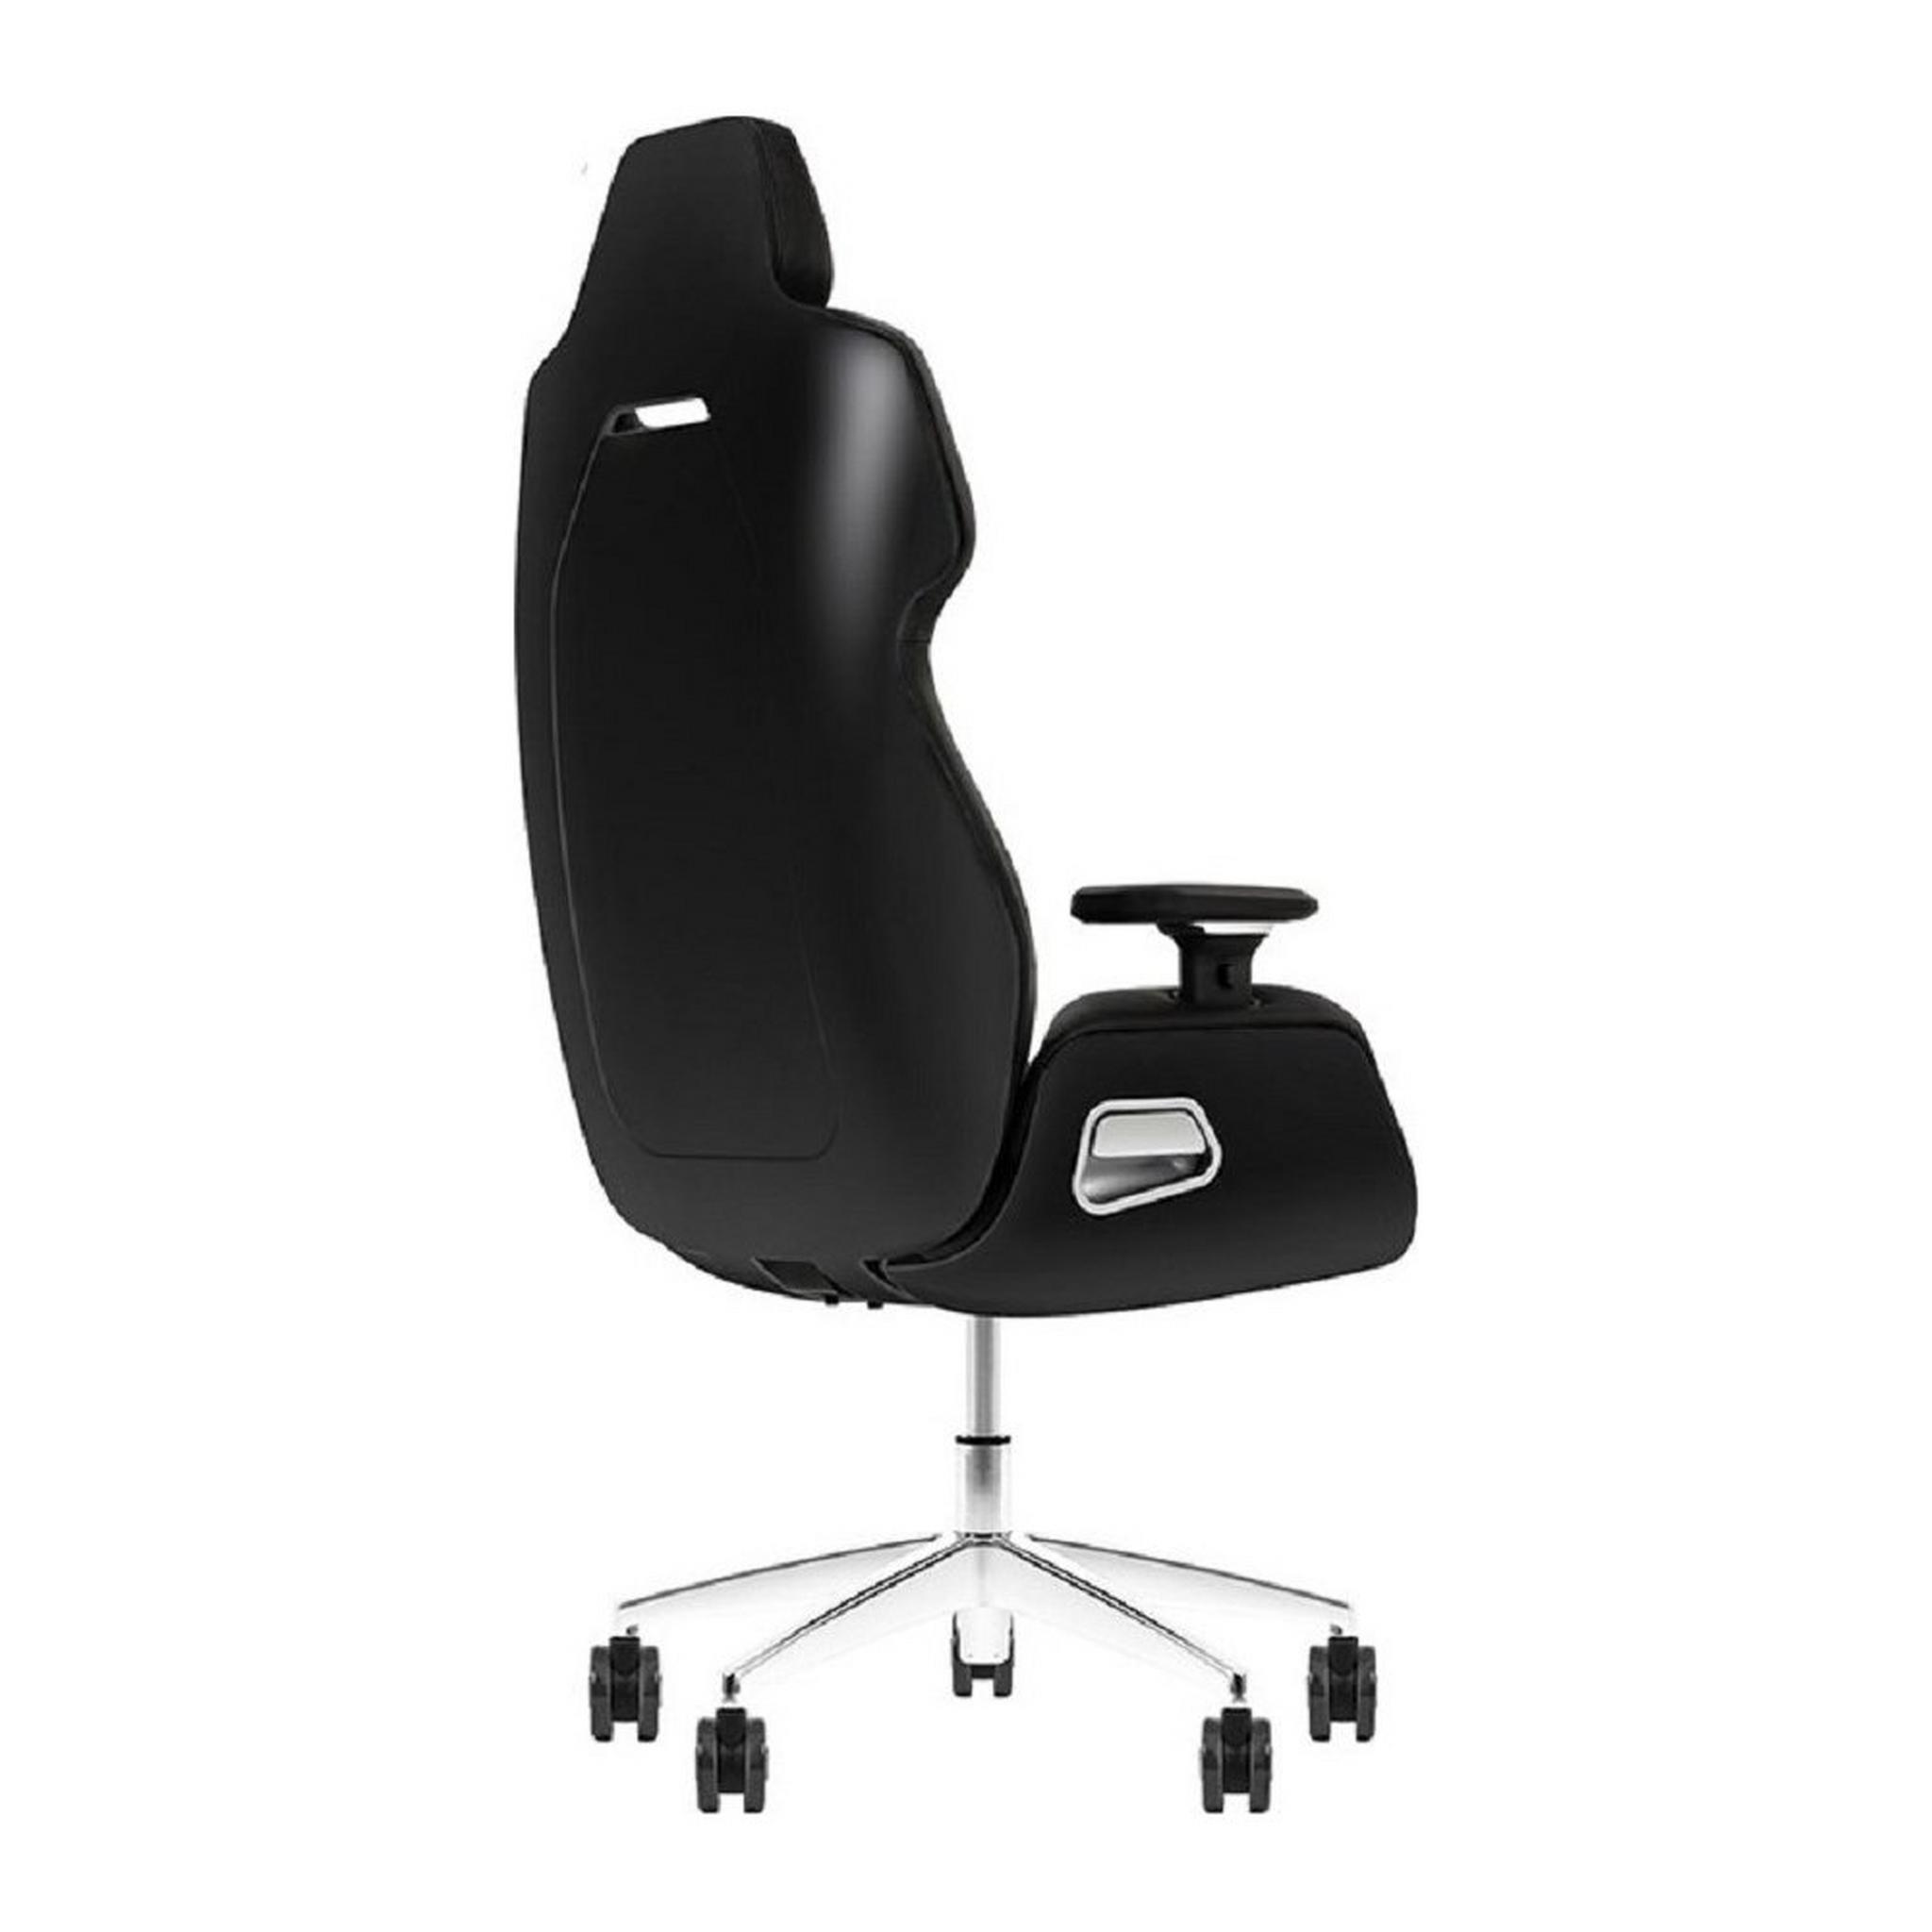 Thermaltake Argent E700 Real Leather Gaming Chair, Design by Studio F. A. Porsche, GGC-ARG-BBLFDL-01 – Black